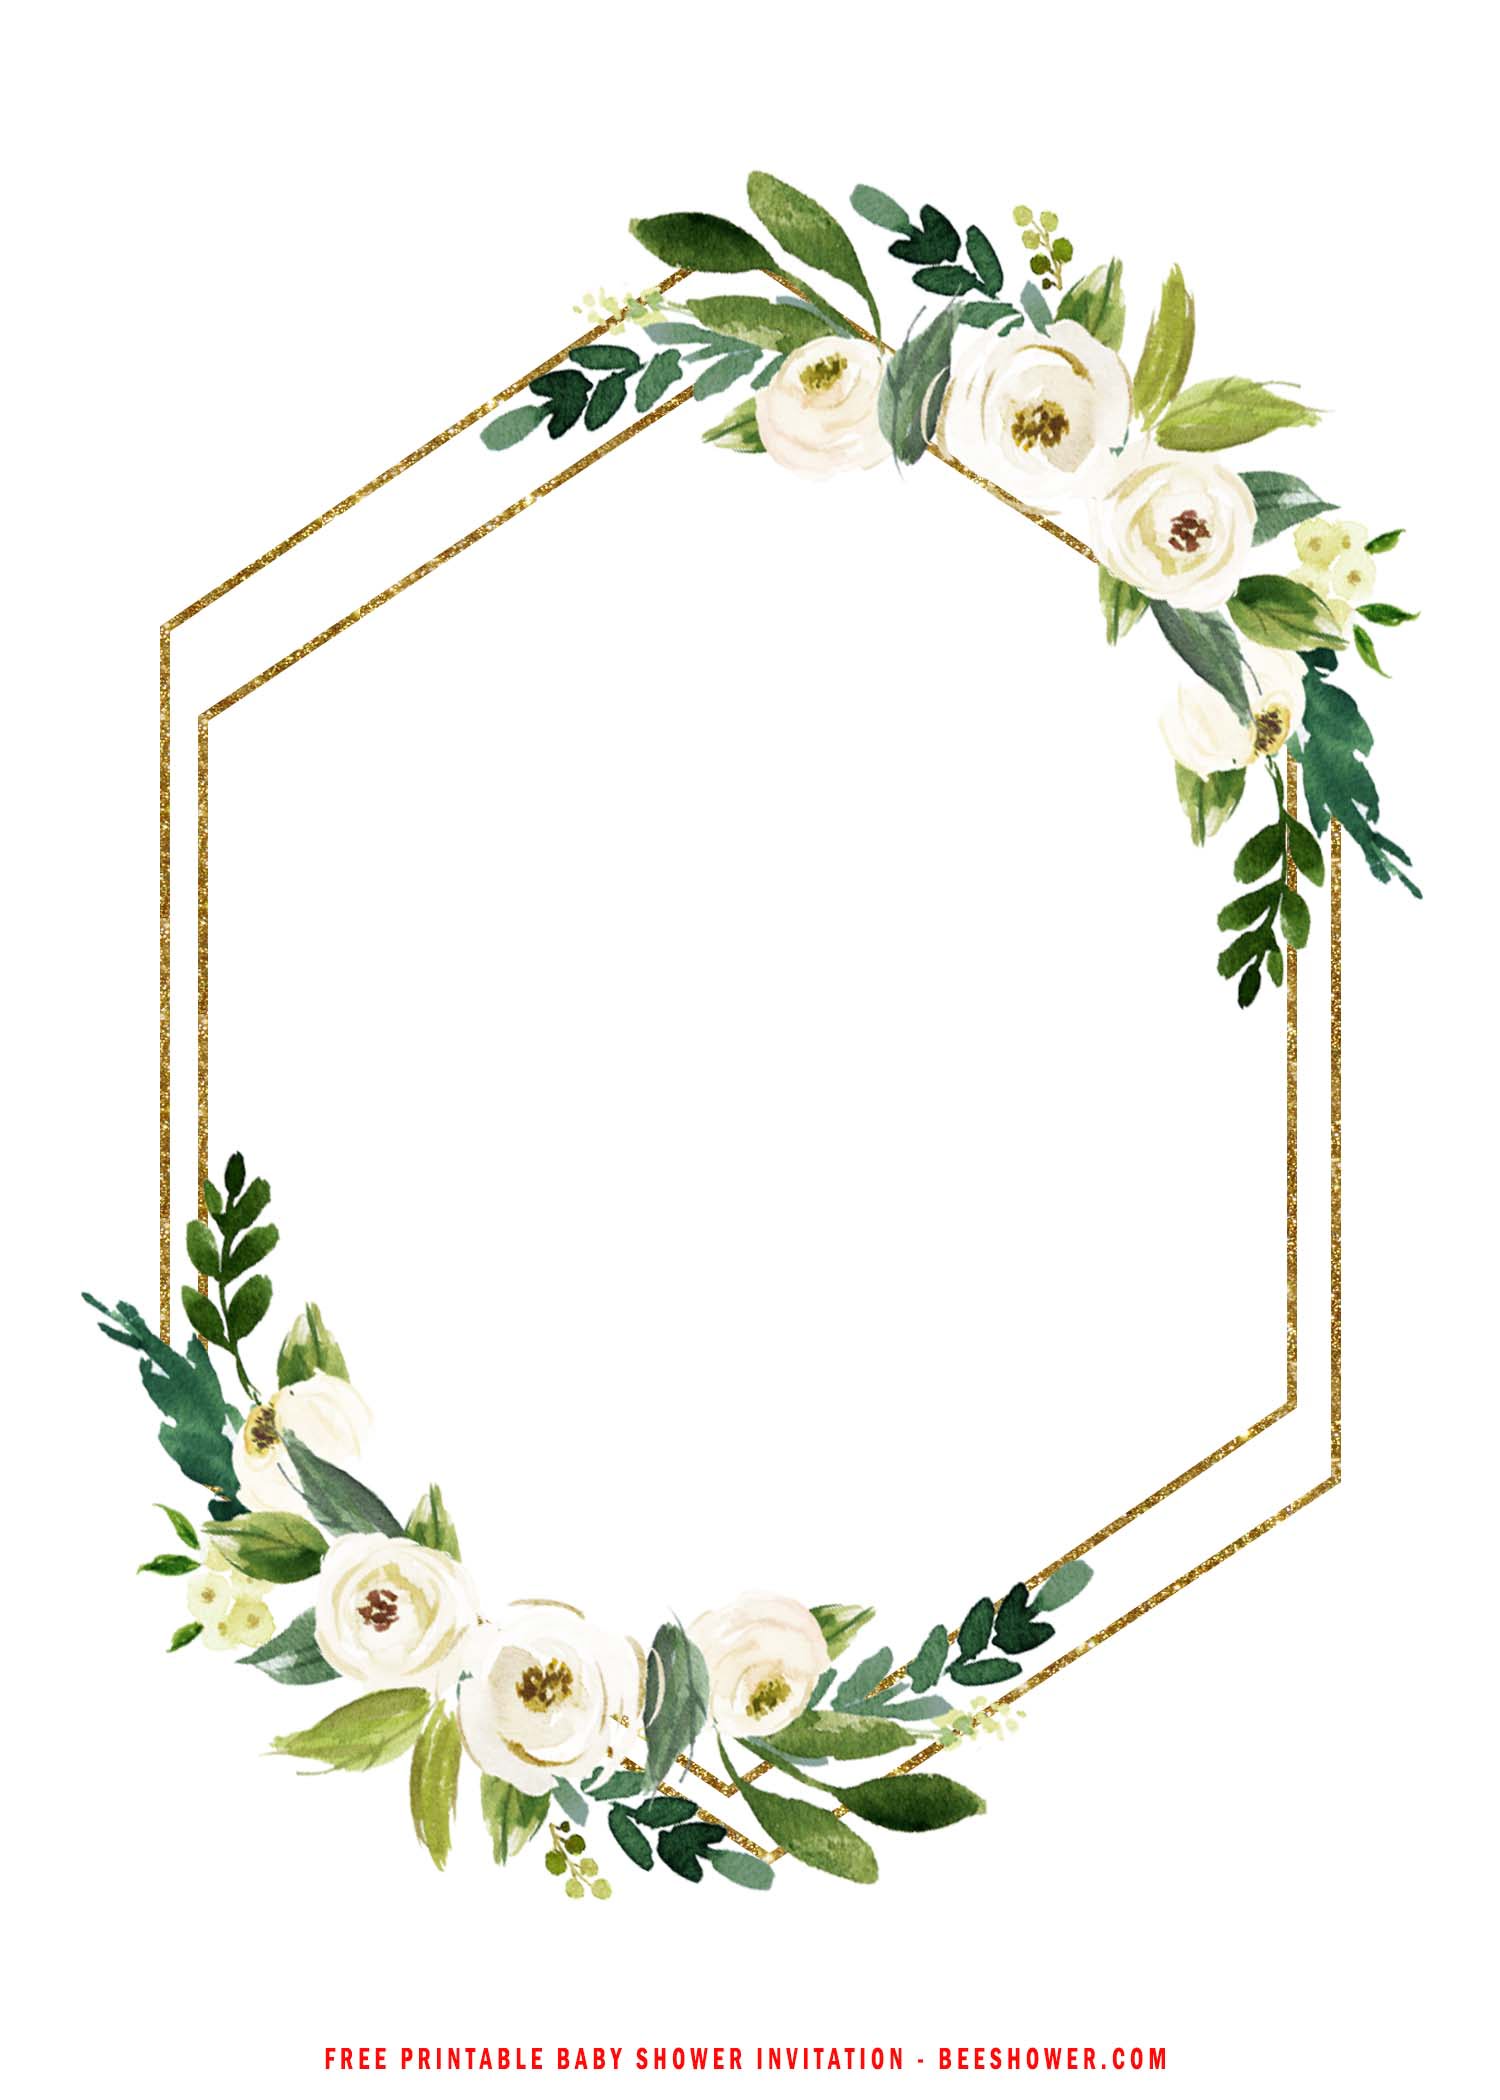 (FREE Printable) Greenery and Gold Frame Baby Shower Invitation